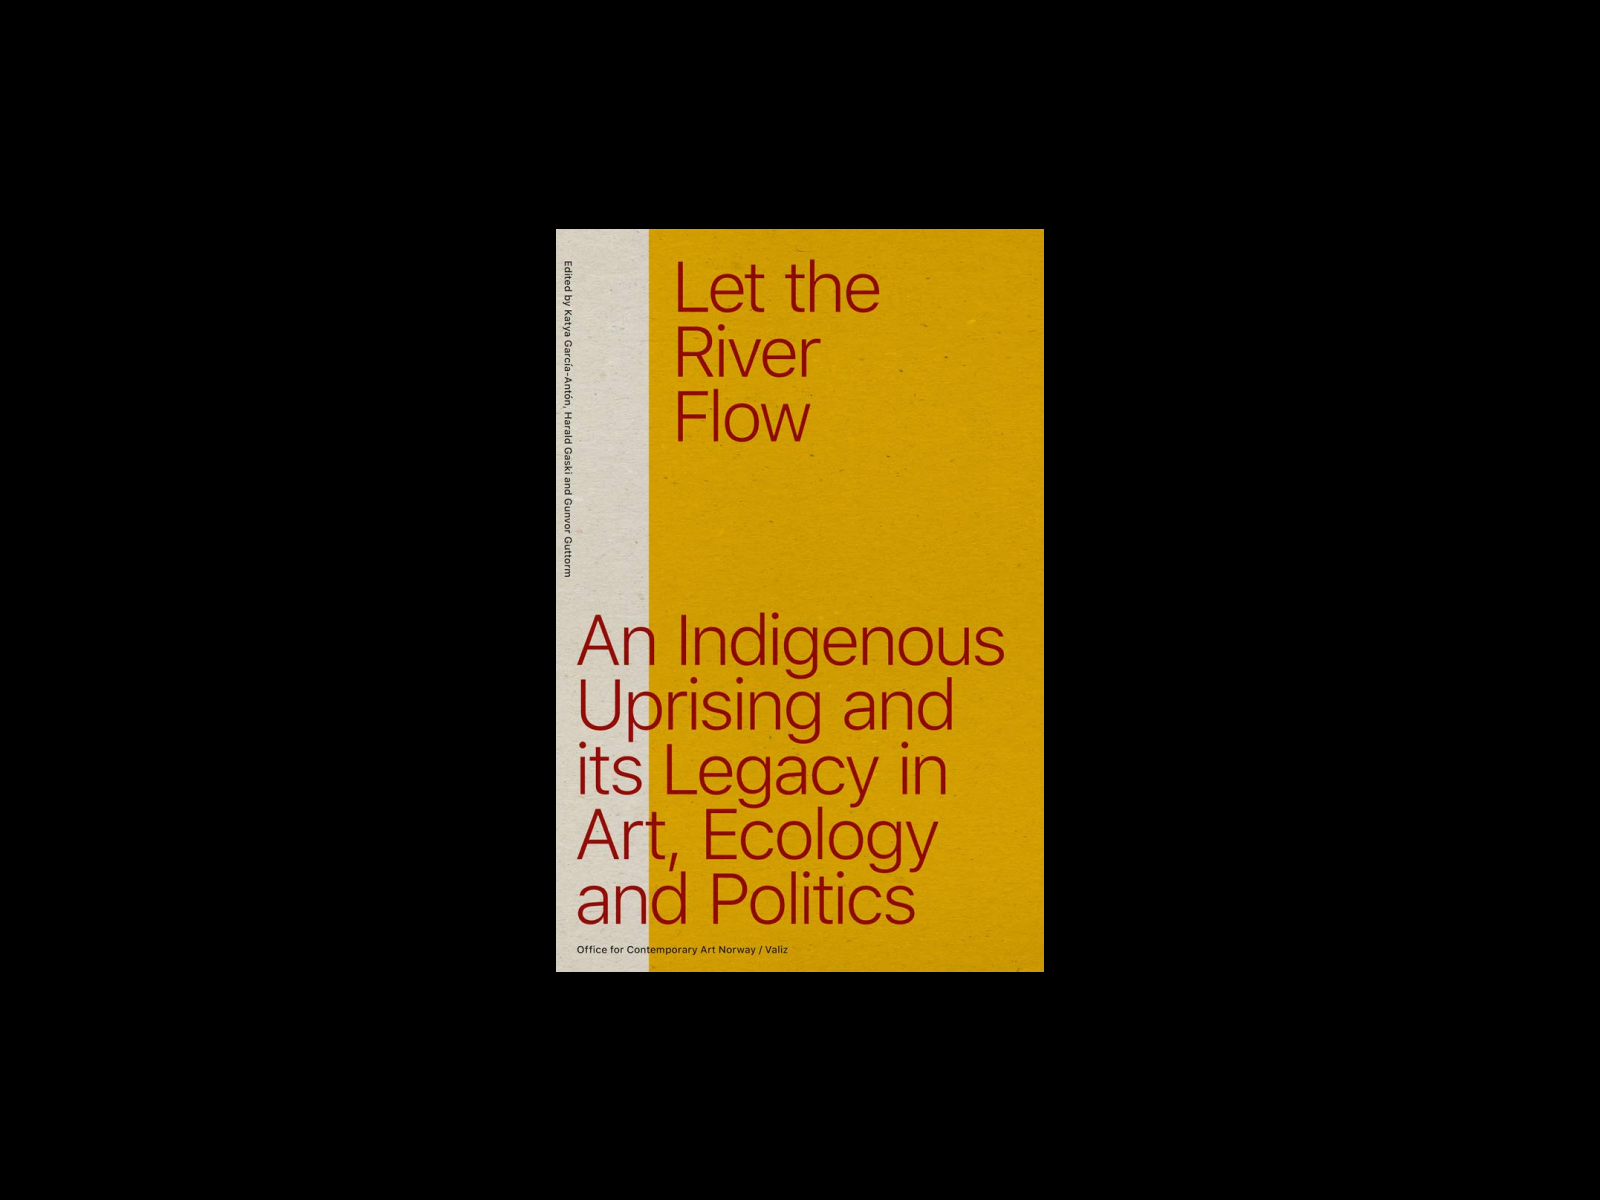 Let the River Flow: An Eco-Indigenous Uprising and Its Legacies in Art and Politics